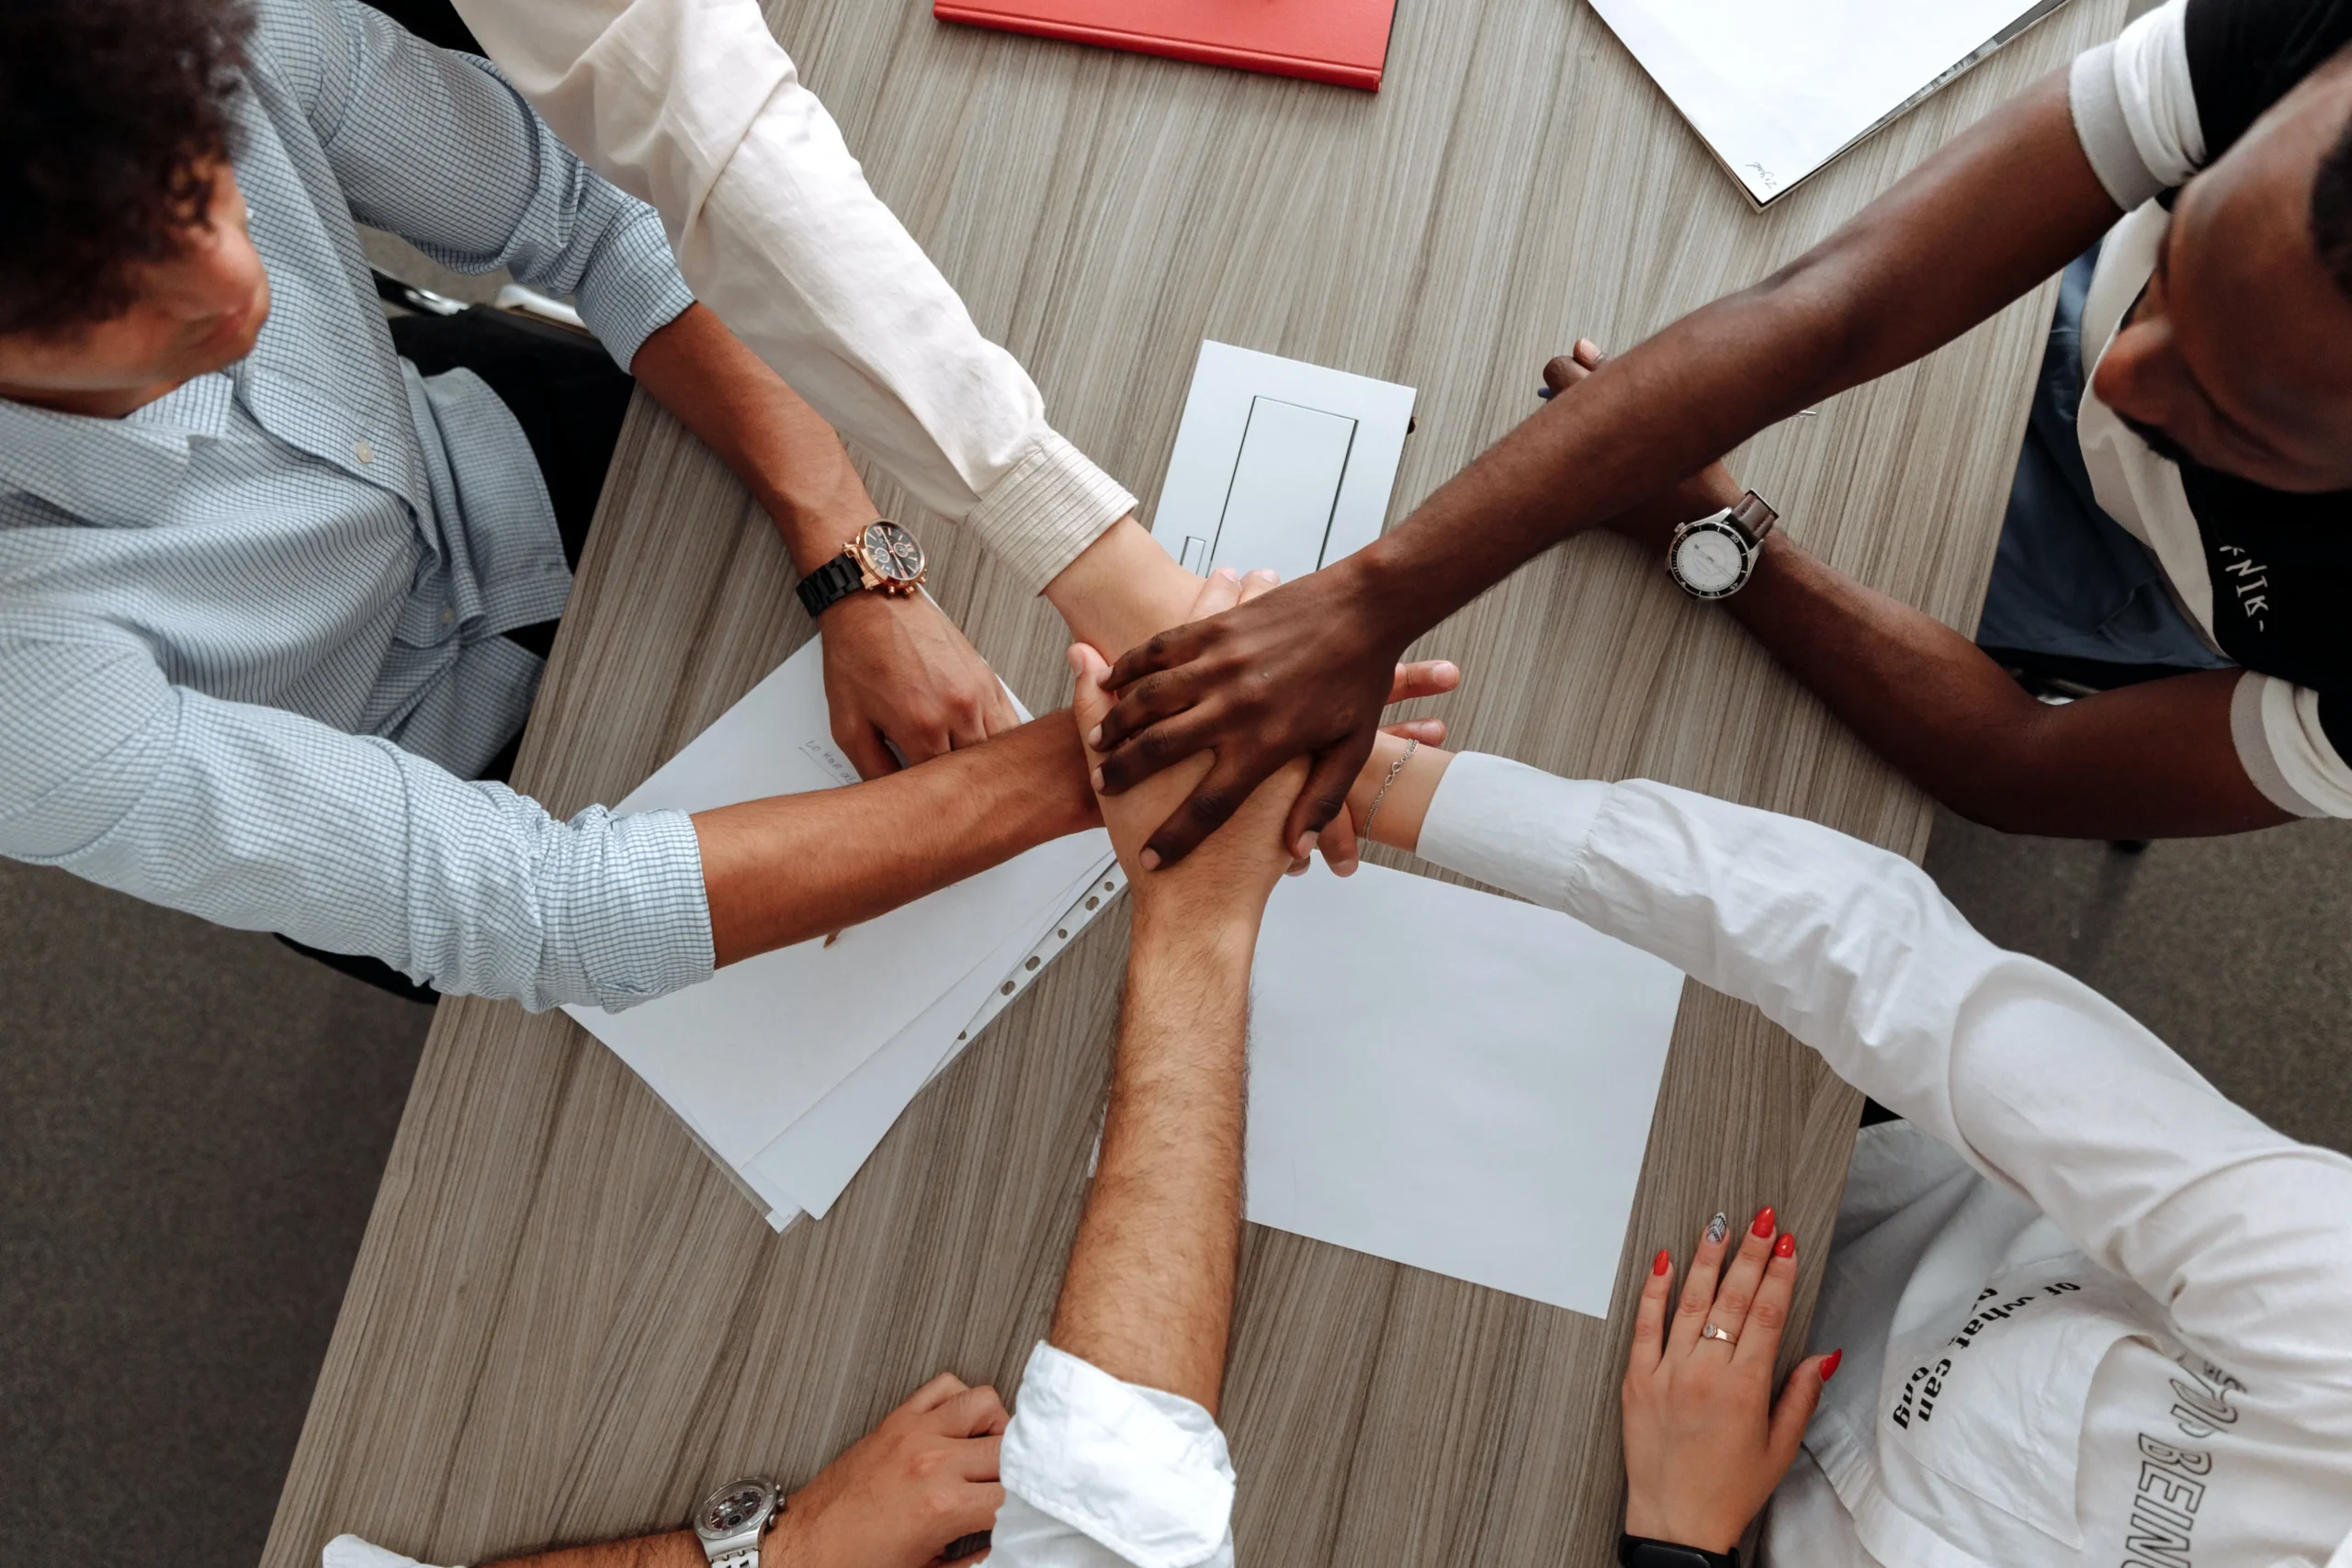 Image of a corporate team of people with their hands together at a business meeting discussing health and wellbeing and community values of their business